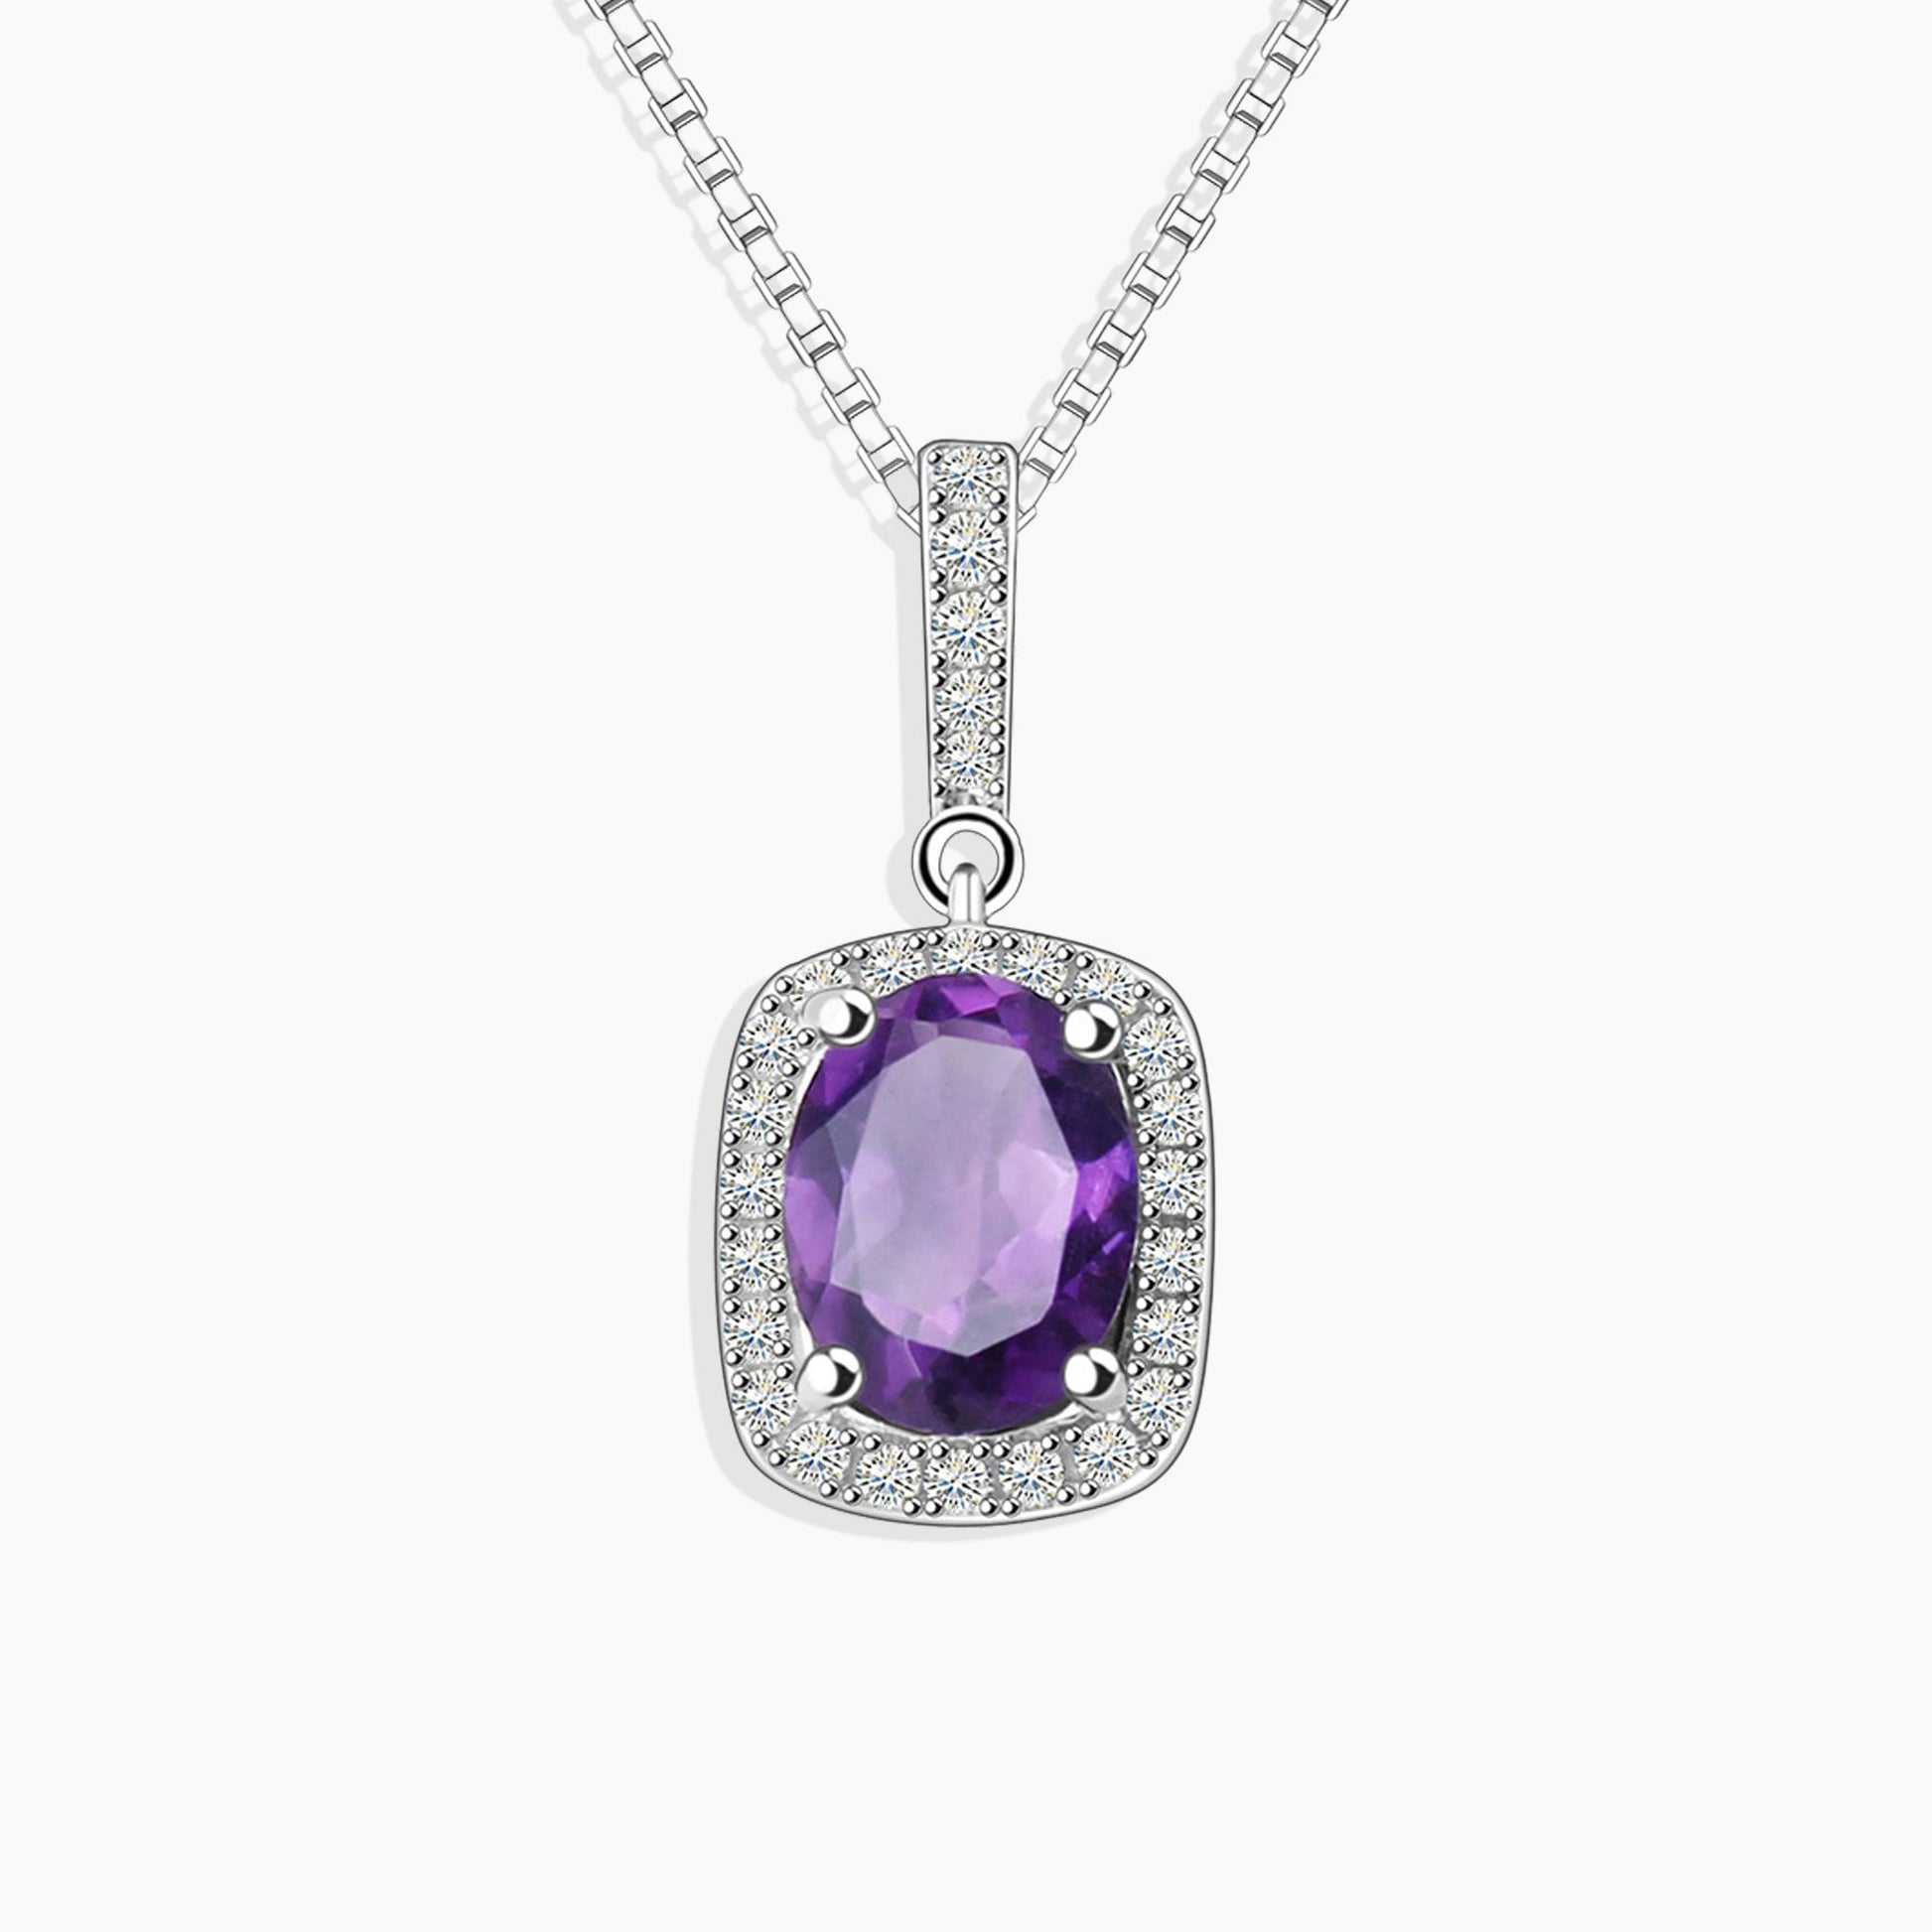 Front view of Radiant Cushion Cut Amethyst & CZ Pendant, showcasing a dazzling cushion-cut amethyst stone adorned with CZ accents, crafted in sterling silver.